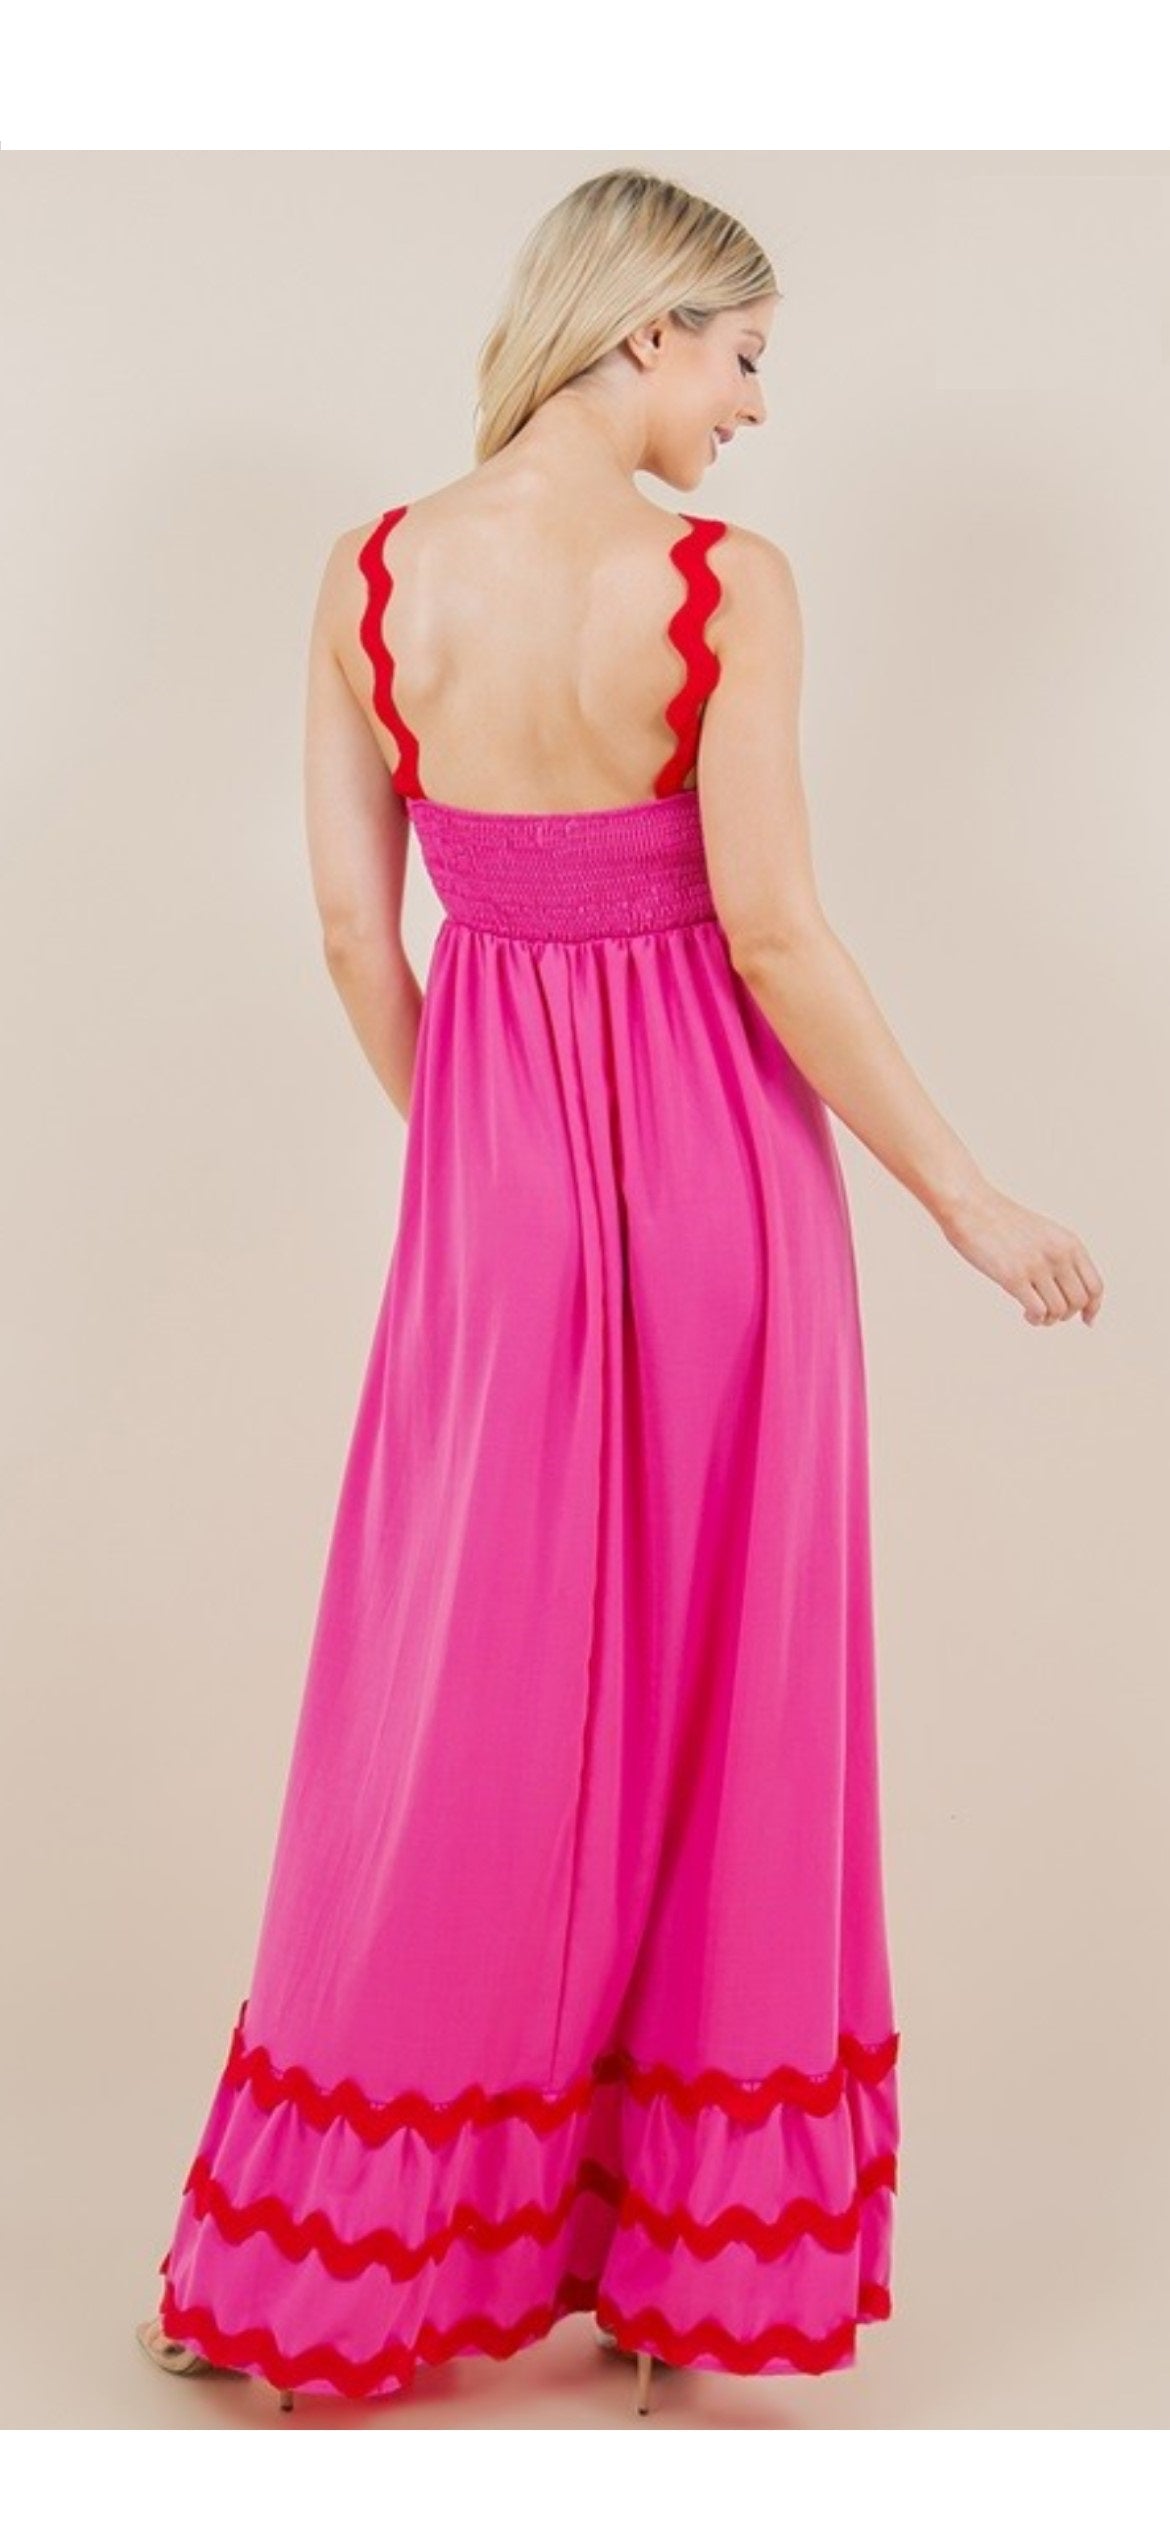 Camila Pink Dress With Red Accents - The Look By Lucy